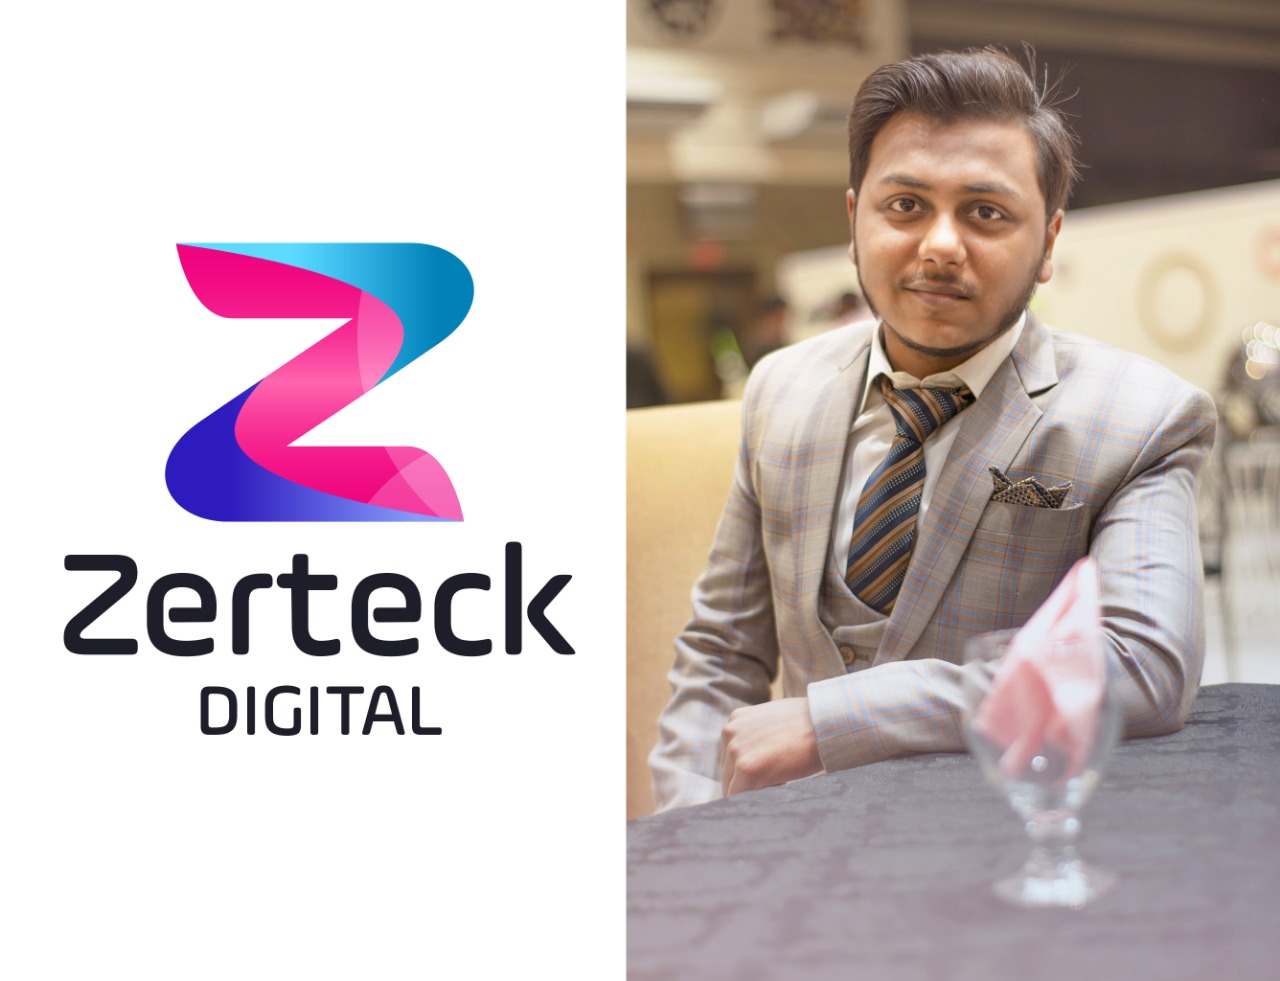 Khizer Ishtiaq, the owner of Zerteck Digital and many renowned projects, is one of the green-aged freelancer and entrepreneur from Pakistan.